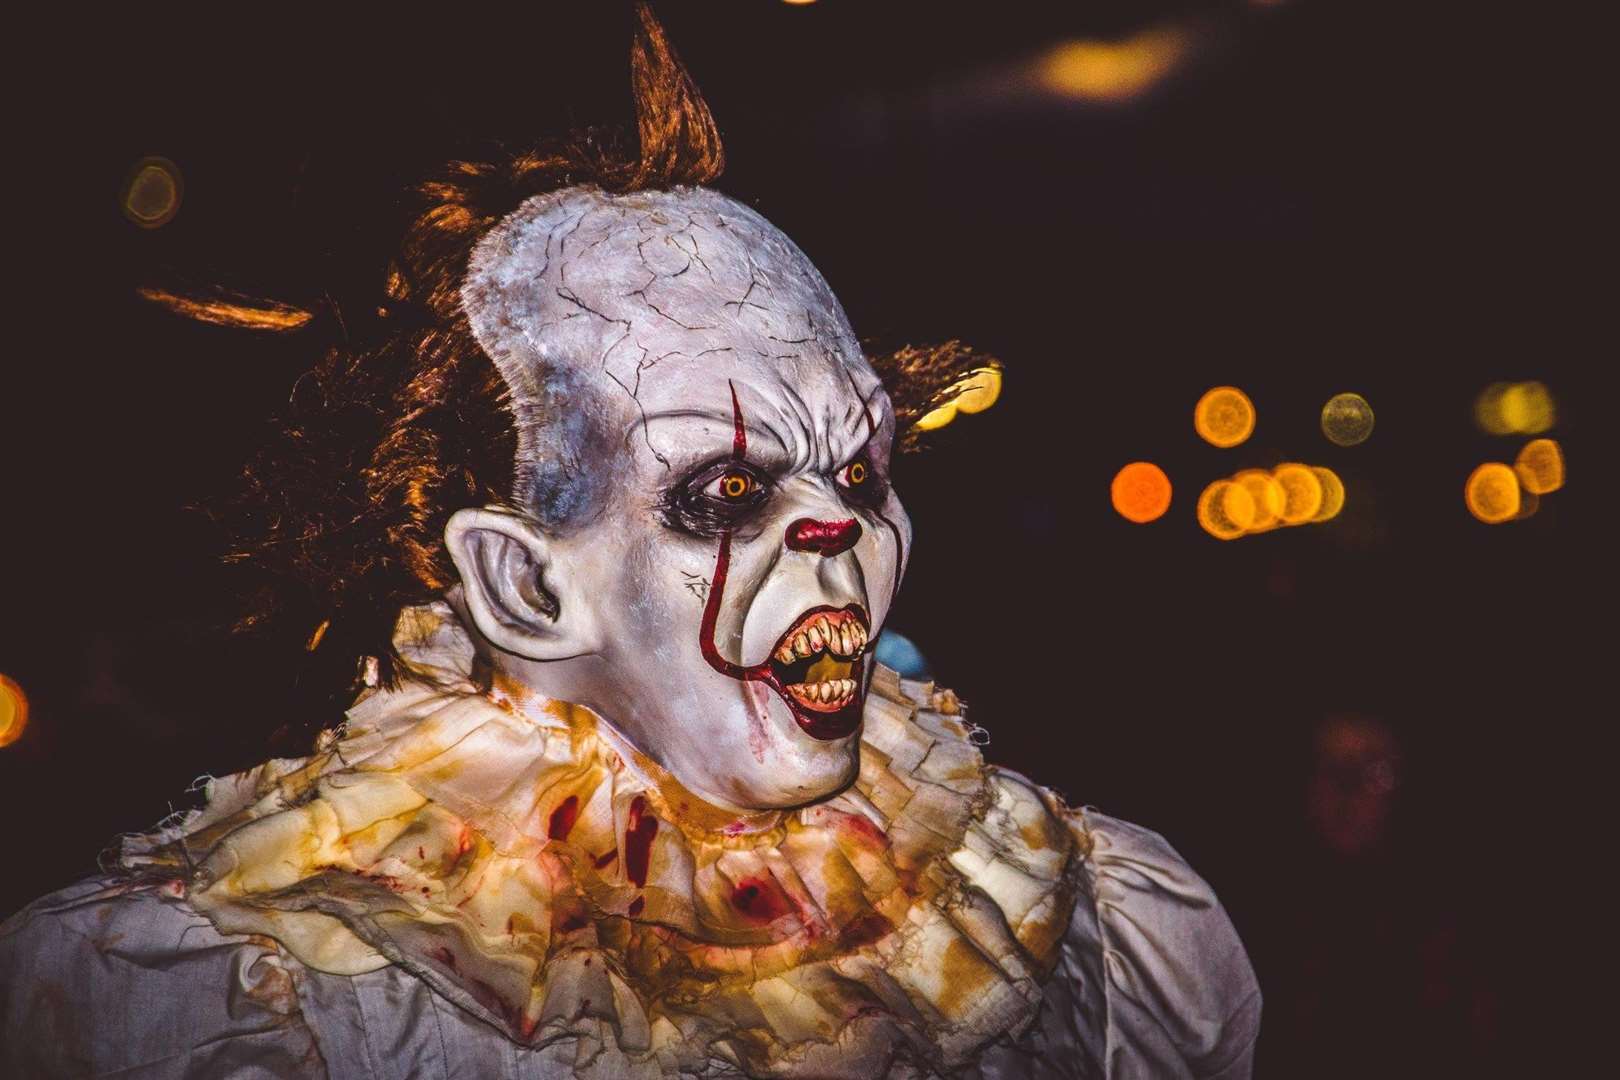 Pennywise the dancing clown from Stephen King’s adapted novel It was in attendance. Picture: Adrian Bennett (5090164)